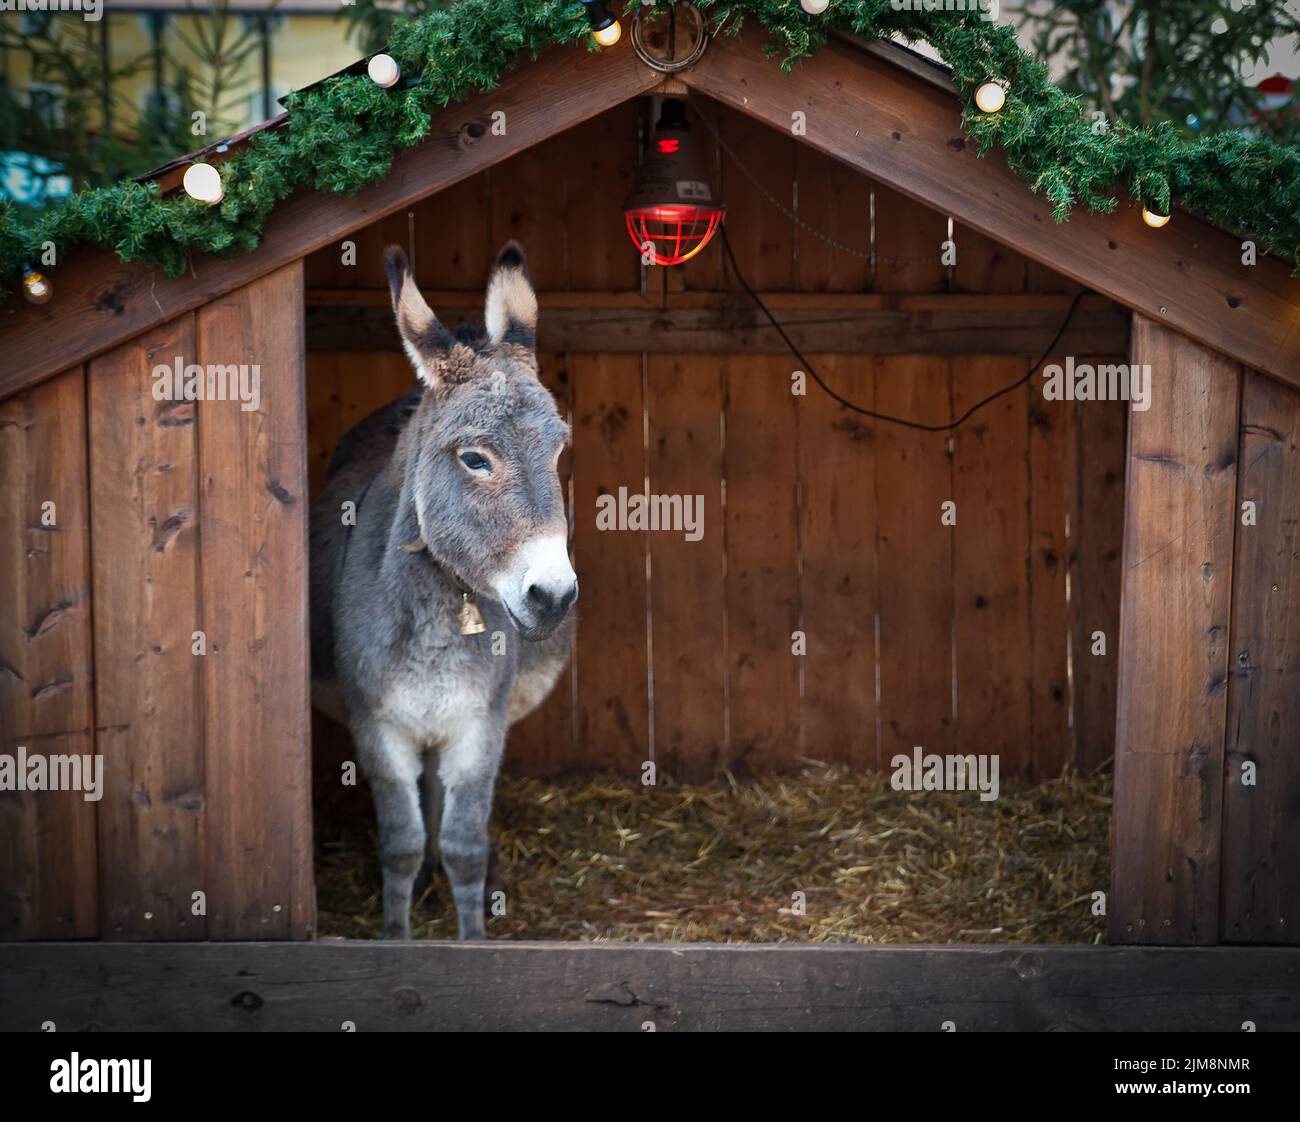 Donkey in a wooden Christmas Stable Stock Photo